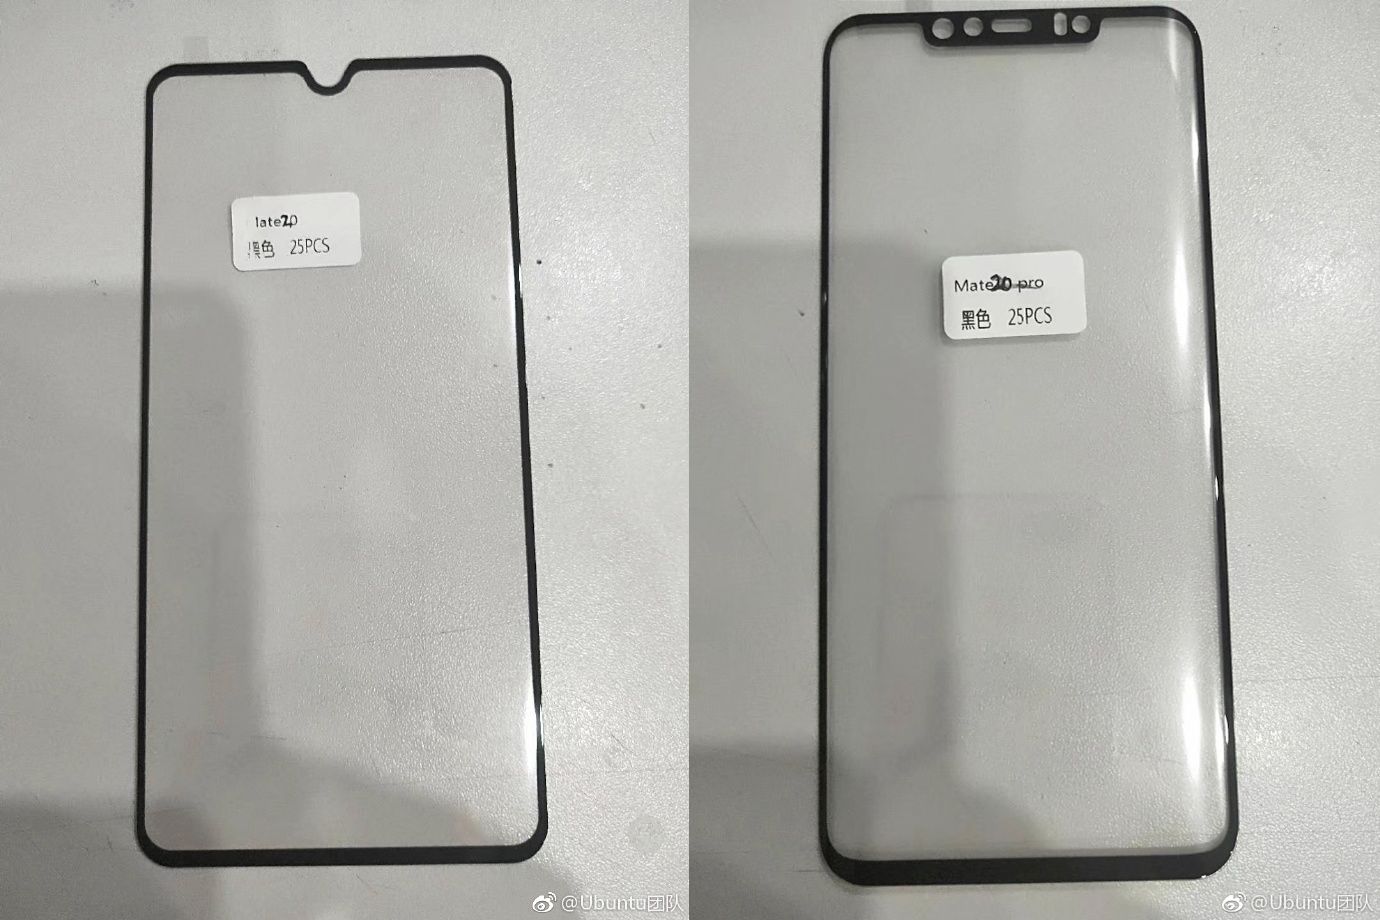 Huawei Mate 20 and Mate 20 Pro display panels